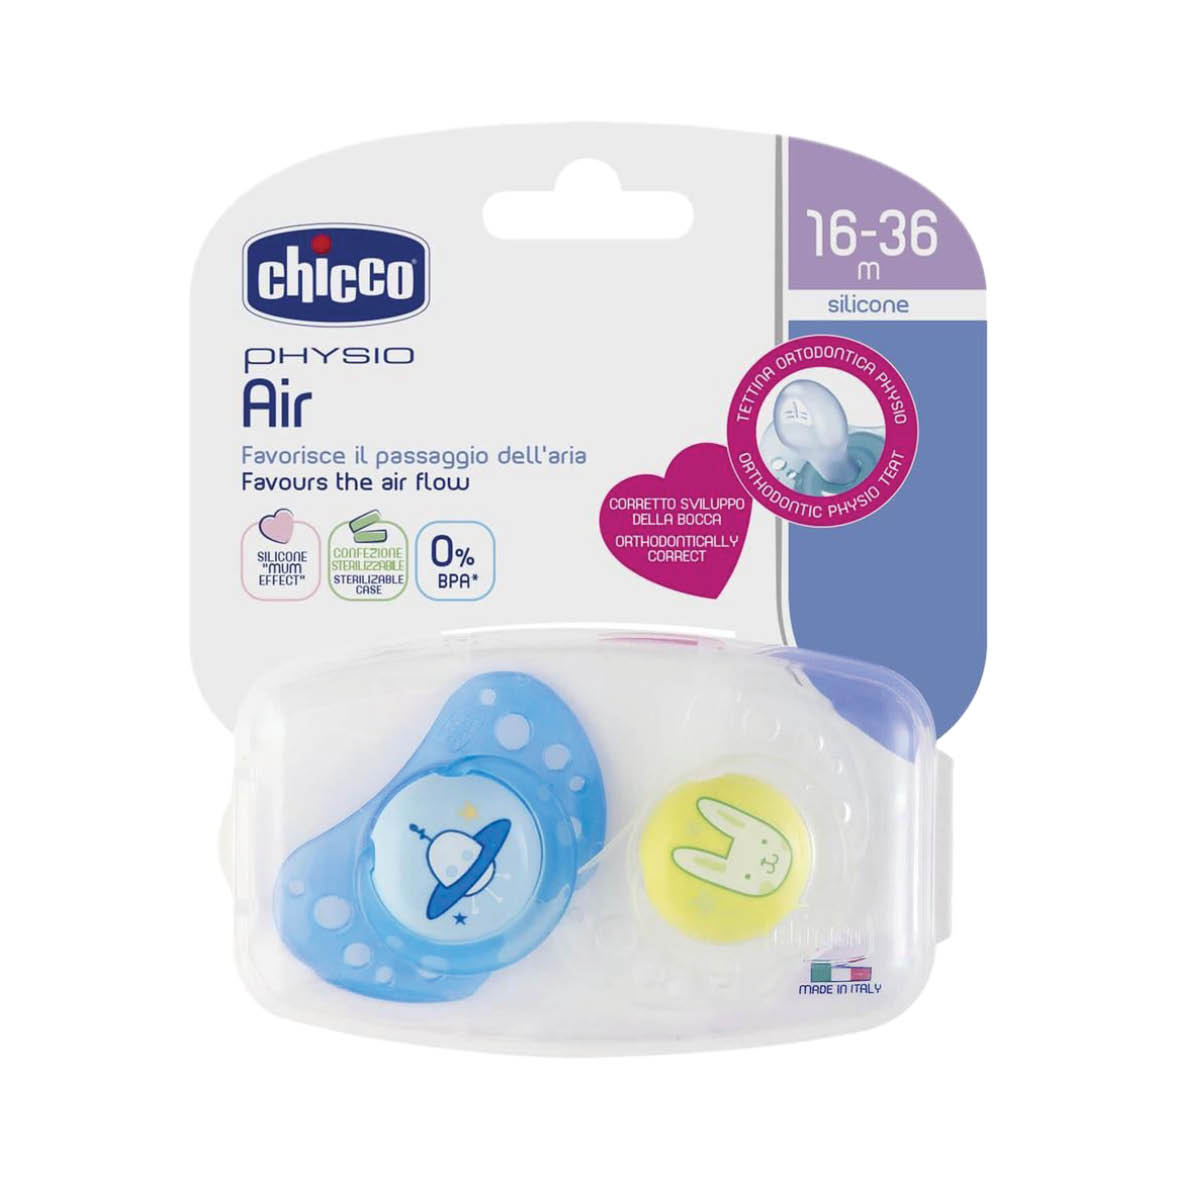 Chicco Soother Physio Air Boy 16-36M 2Pcs